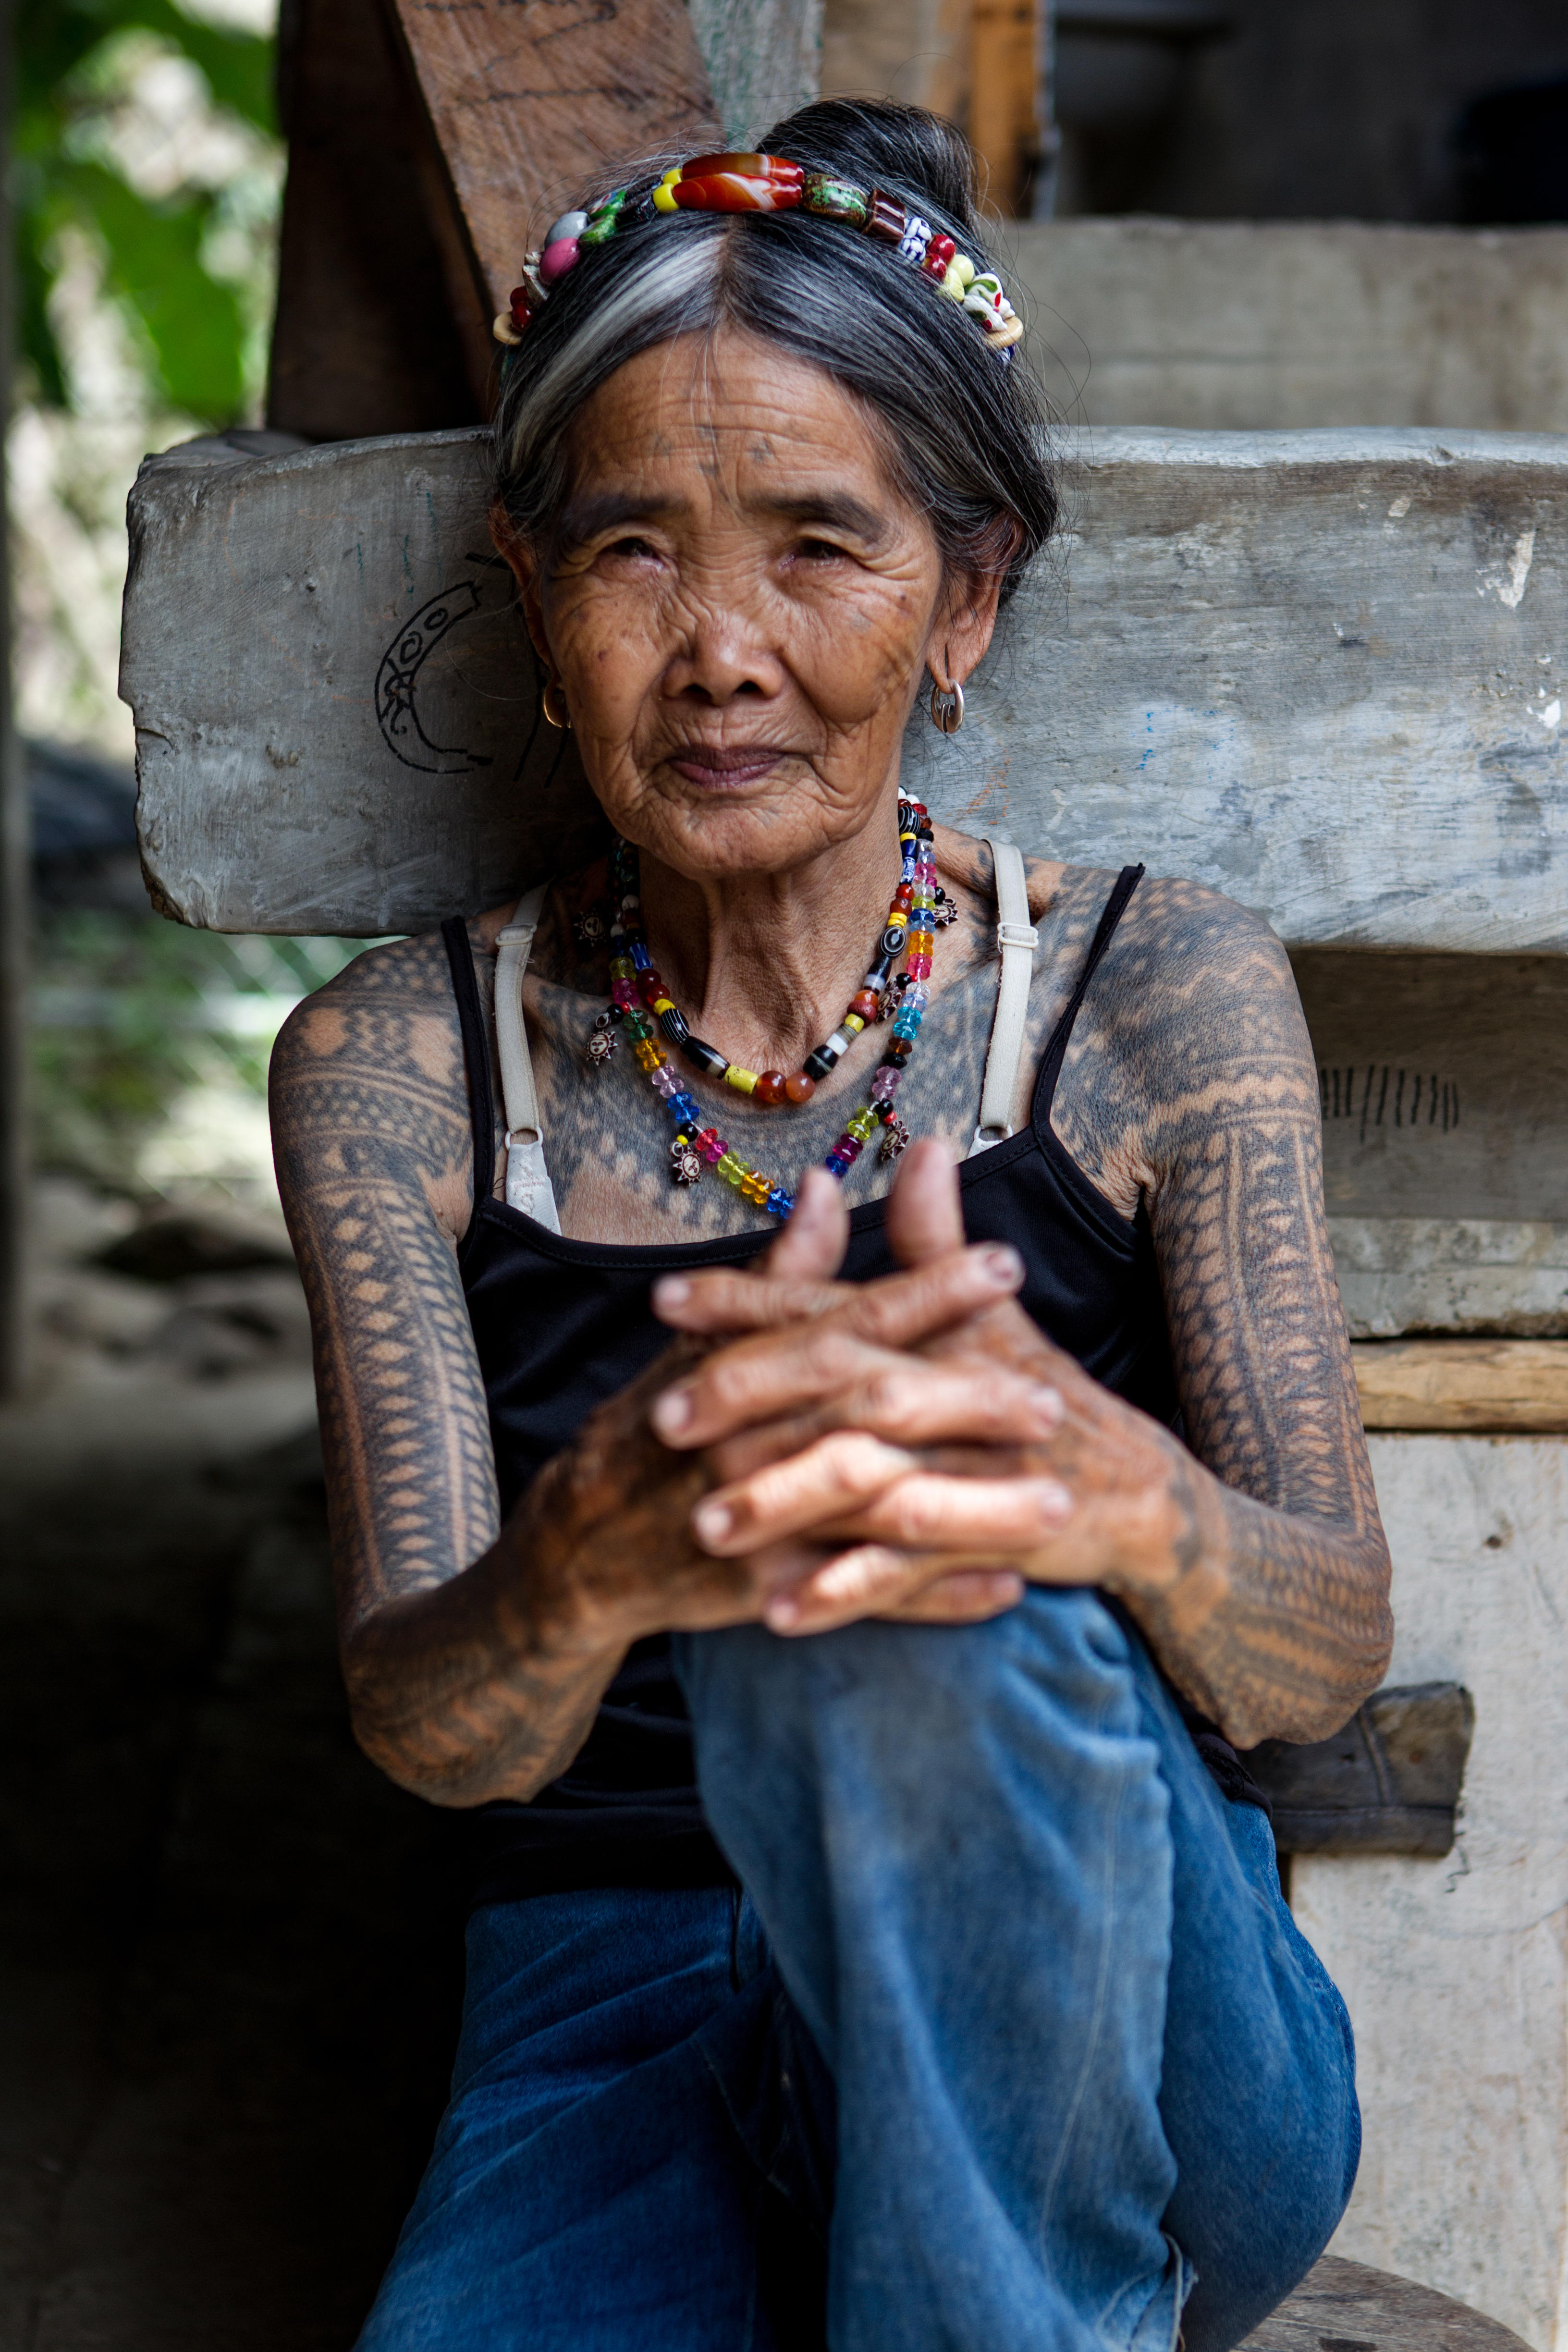 EdsAsh a Filipina tattoo artist from Buscalan Tinglayan Kalinga  Philippines She is often described as the last and oldest mambabatok